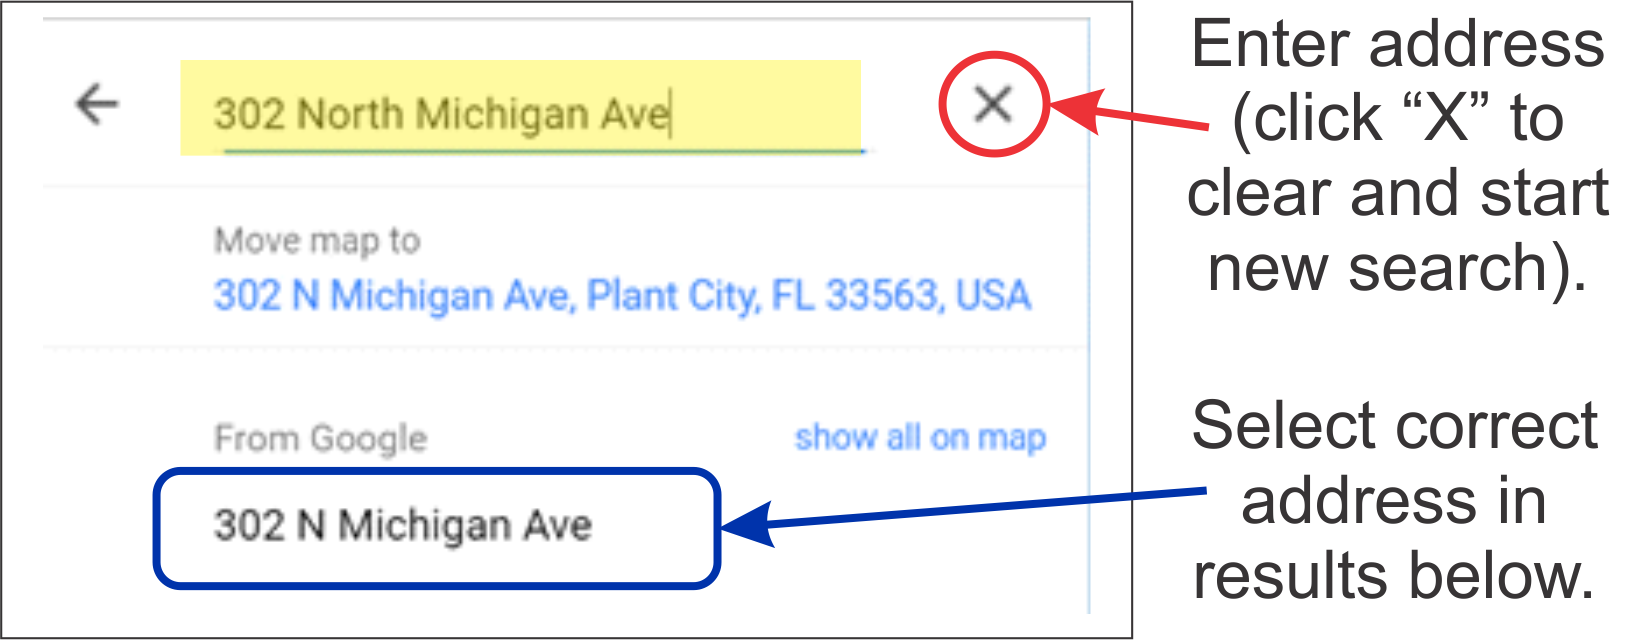 Enter the street address to search for (or click X to clear and start a new search), then select the correct address from the results